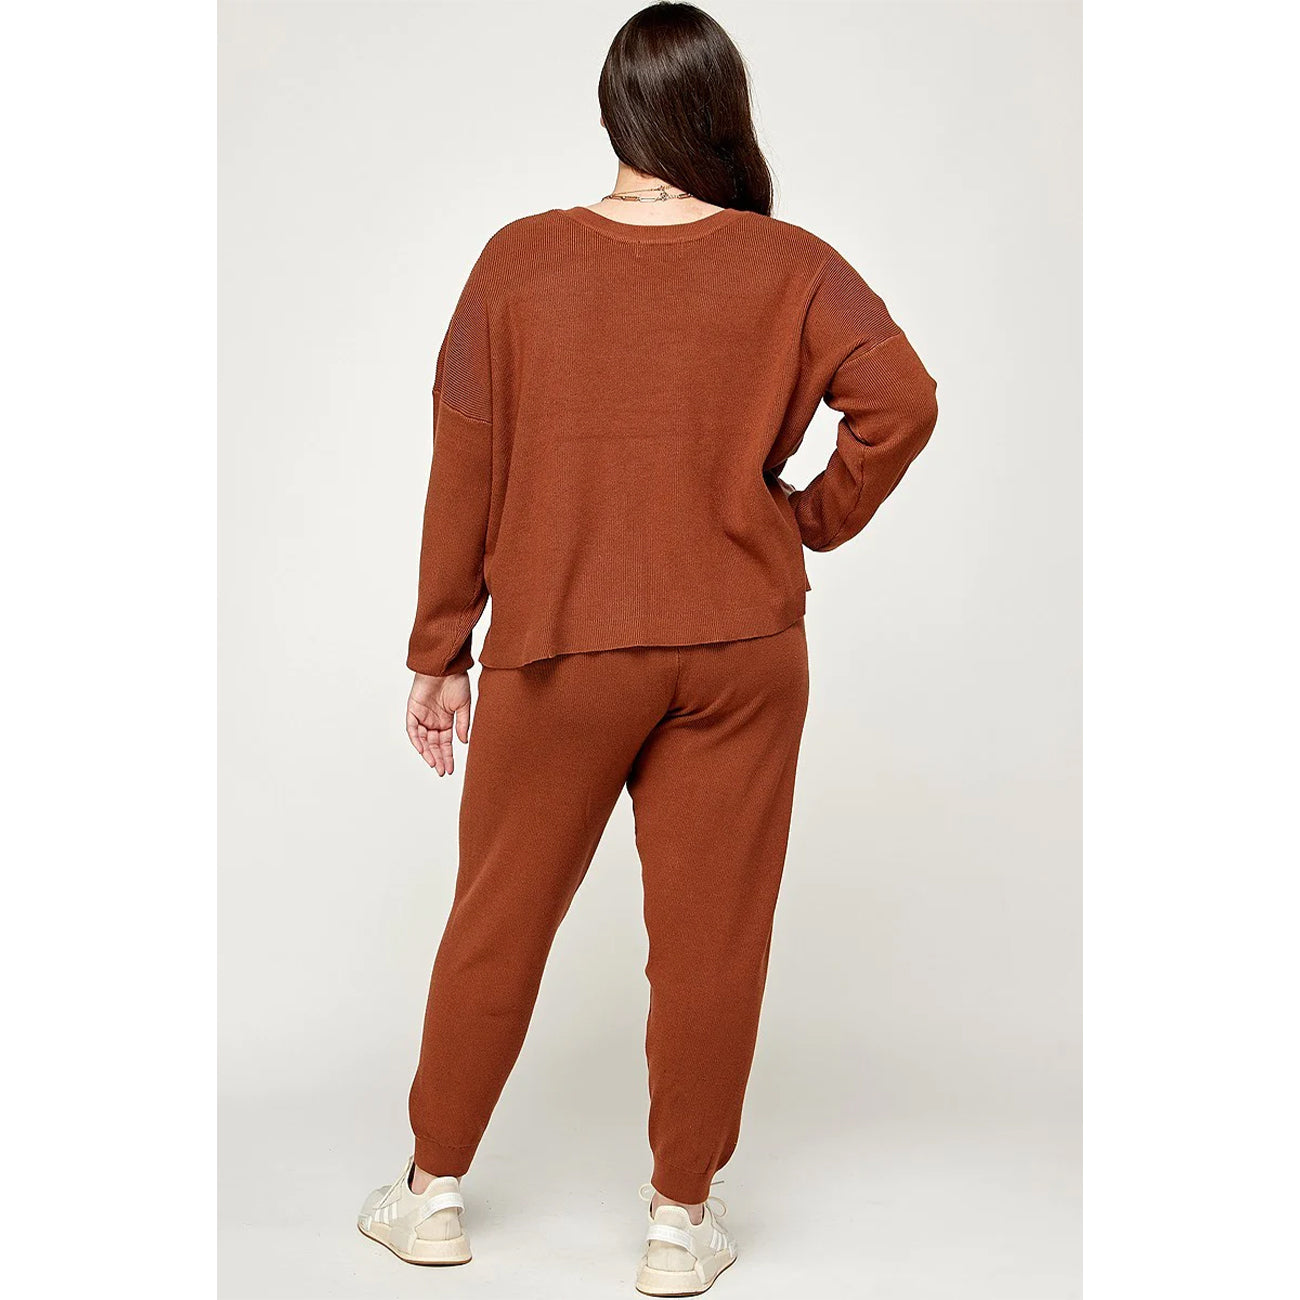 Solid Sweater Knit Women's Top And Pant Set